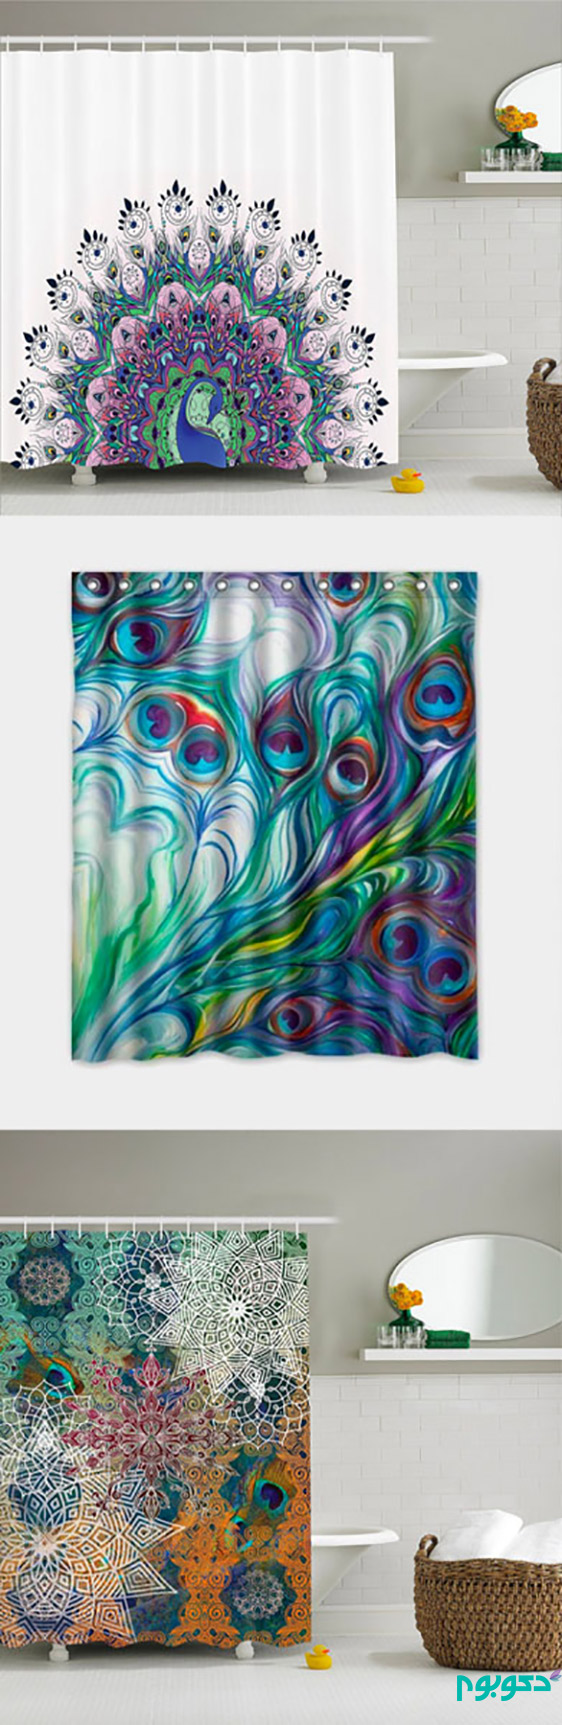 illustrated-shower-curtains-peacock-bathroom-accessories-600x1843-1-1.jpg